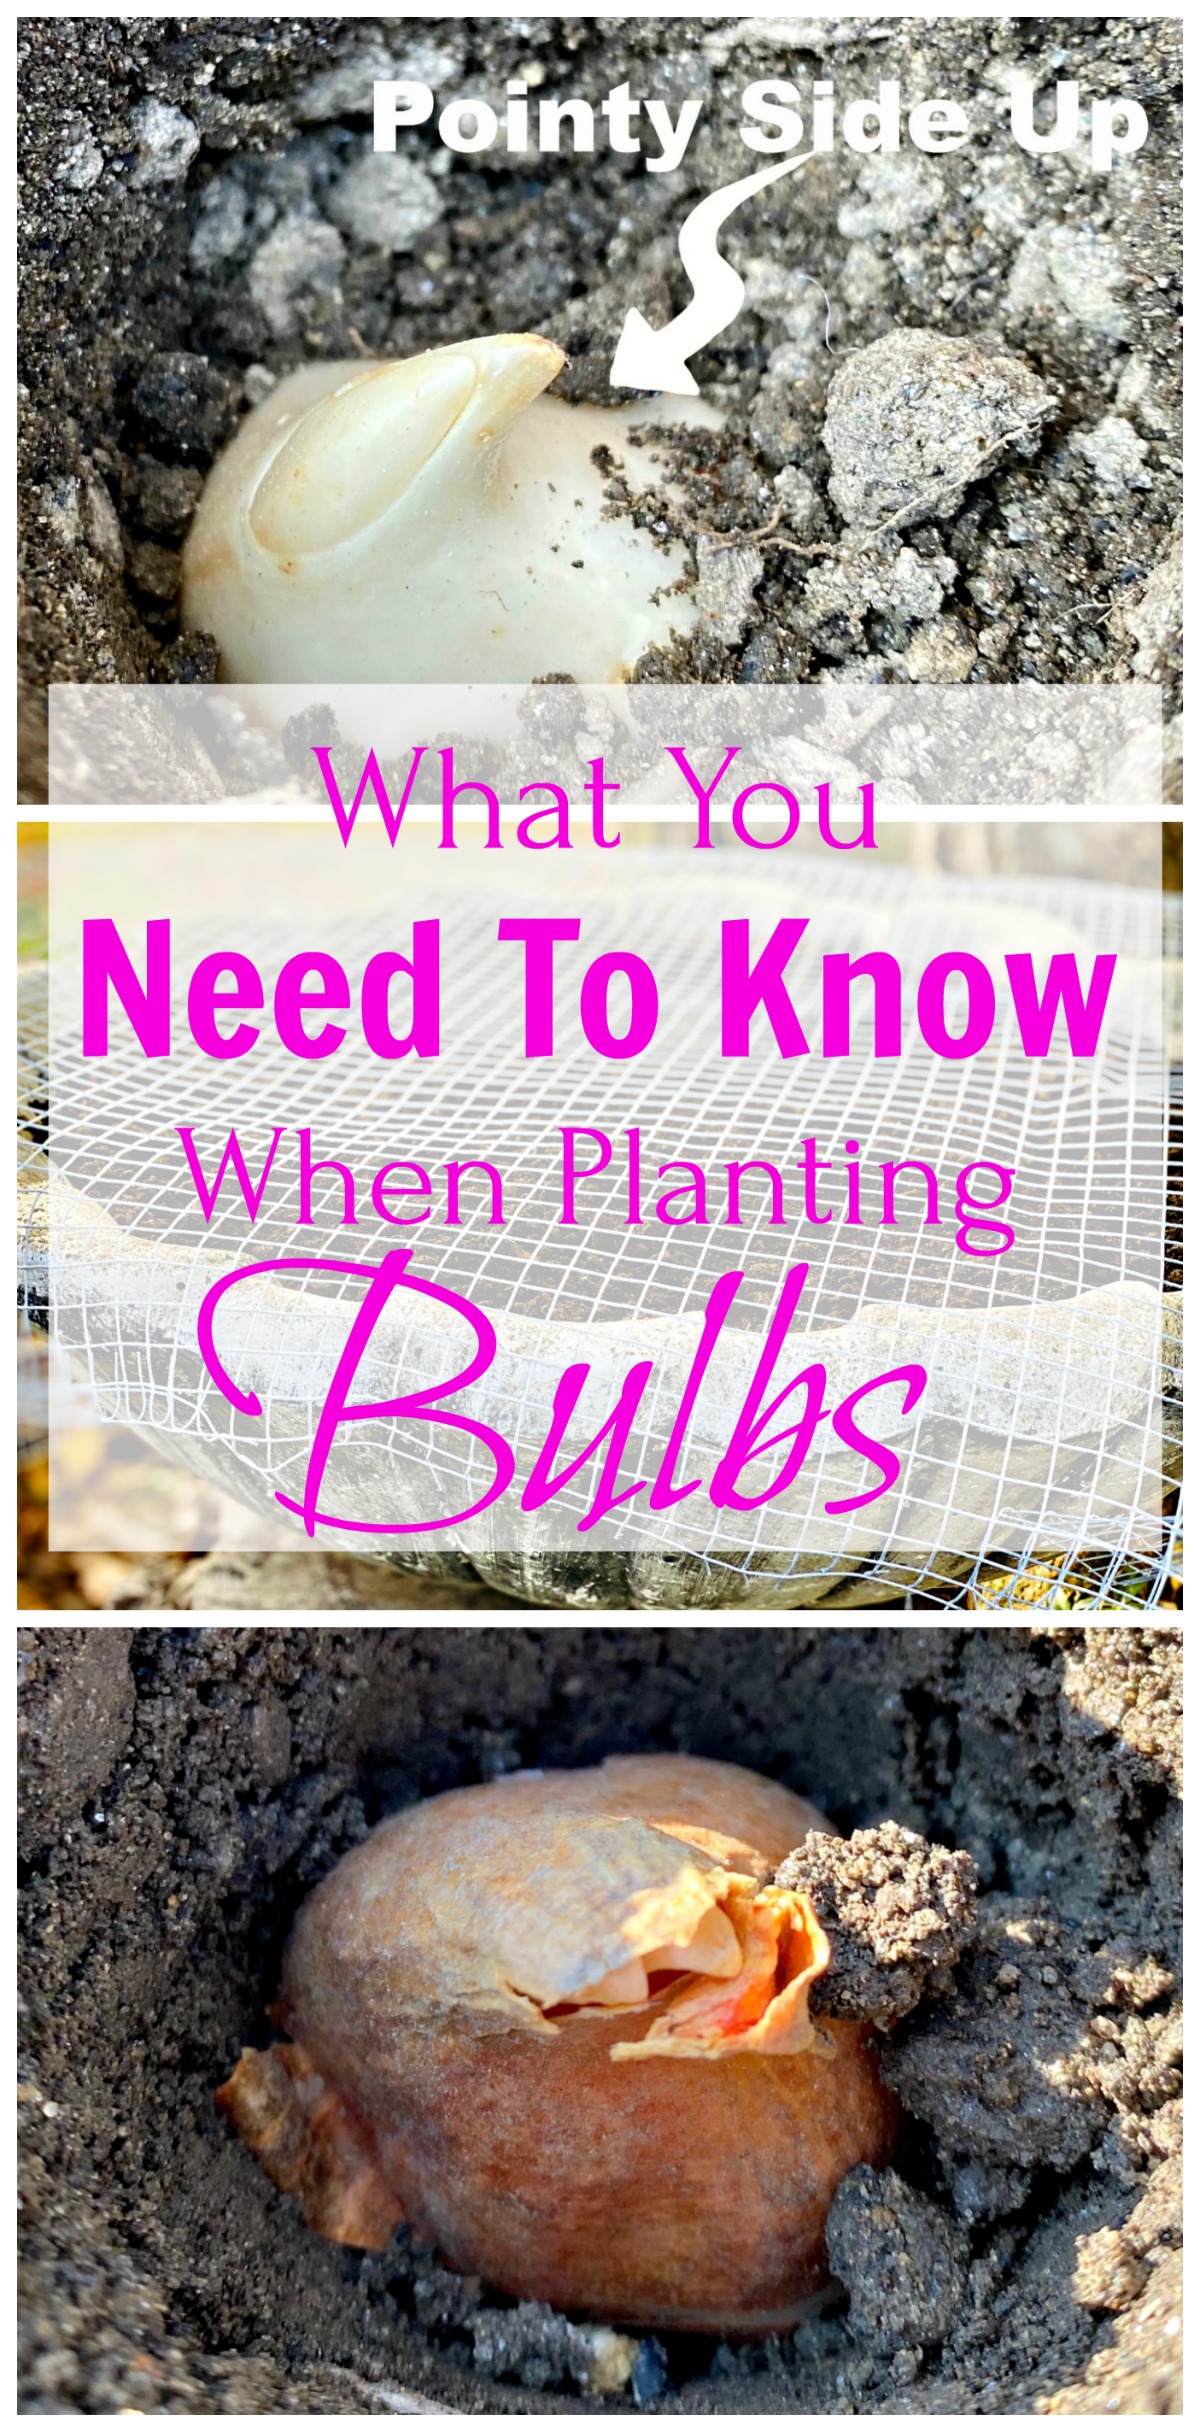 3 major tips you need to know when planting bulbs